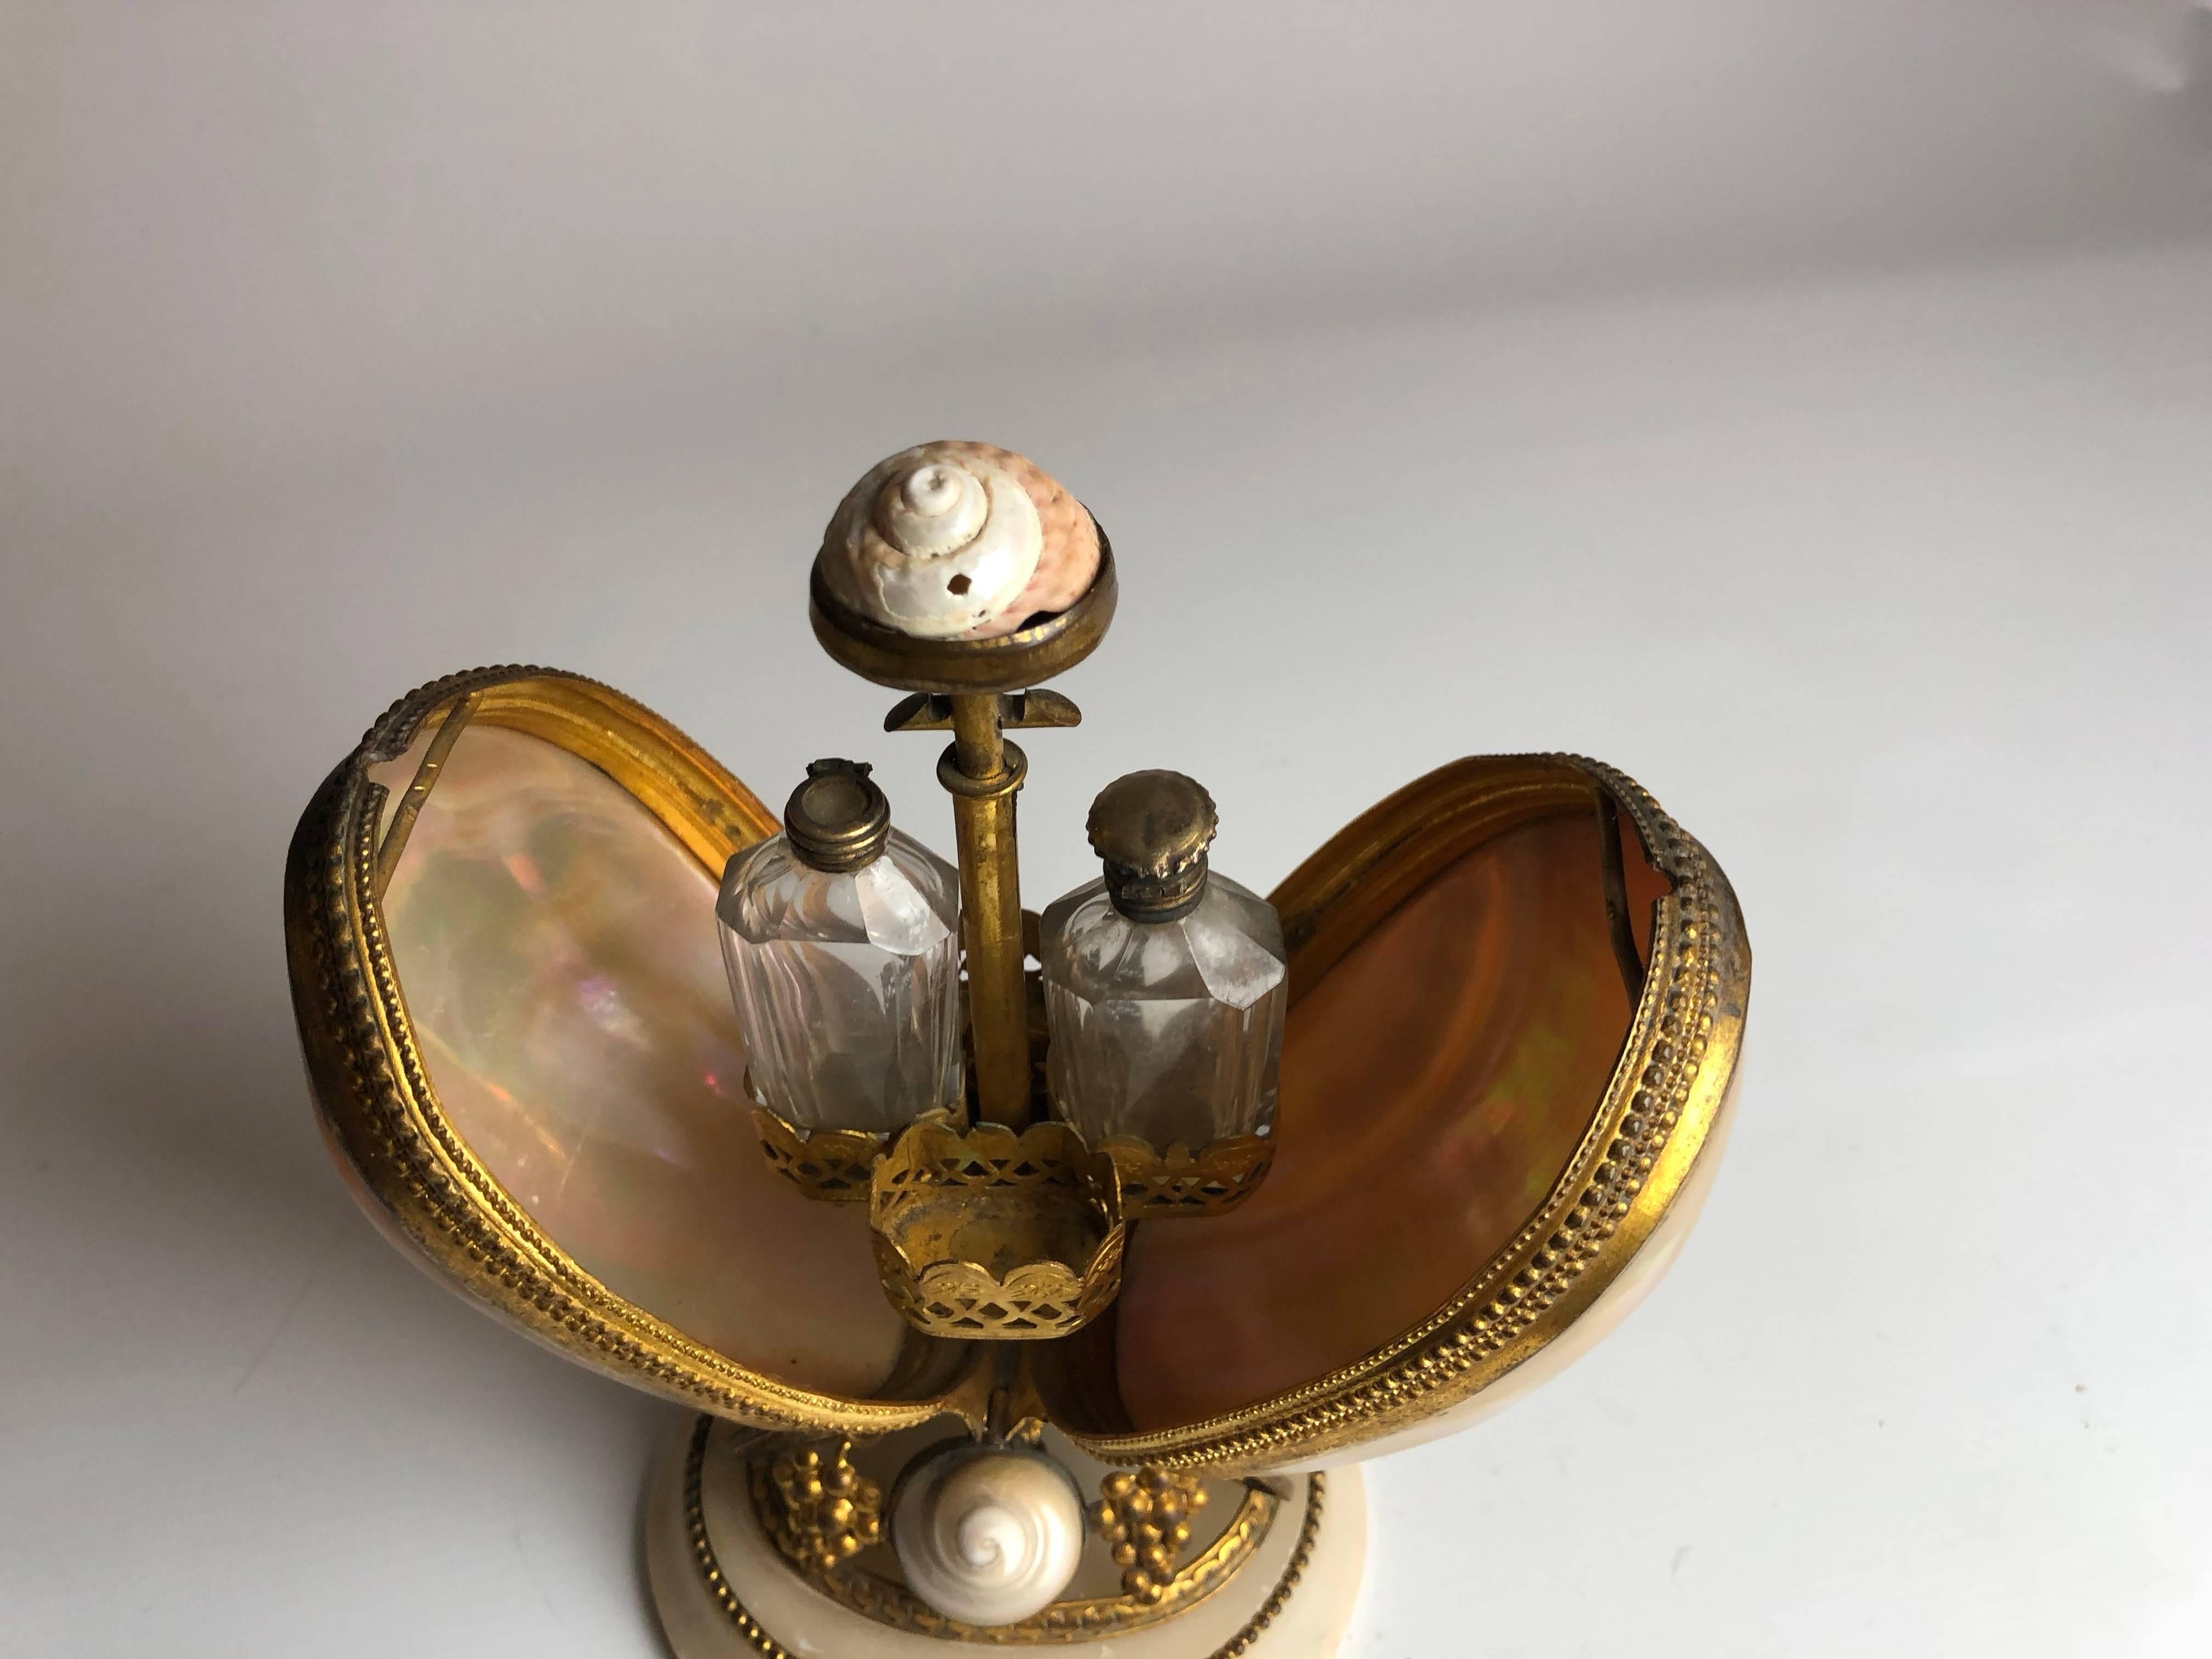 19th Century French Mechanical Perfume or Scent Caddy, Mother-of-Pearl Shells 1